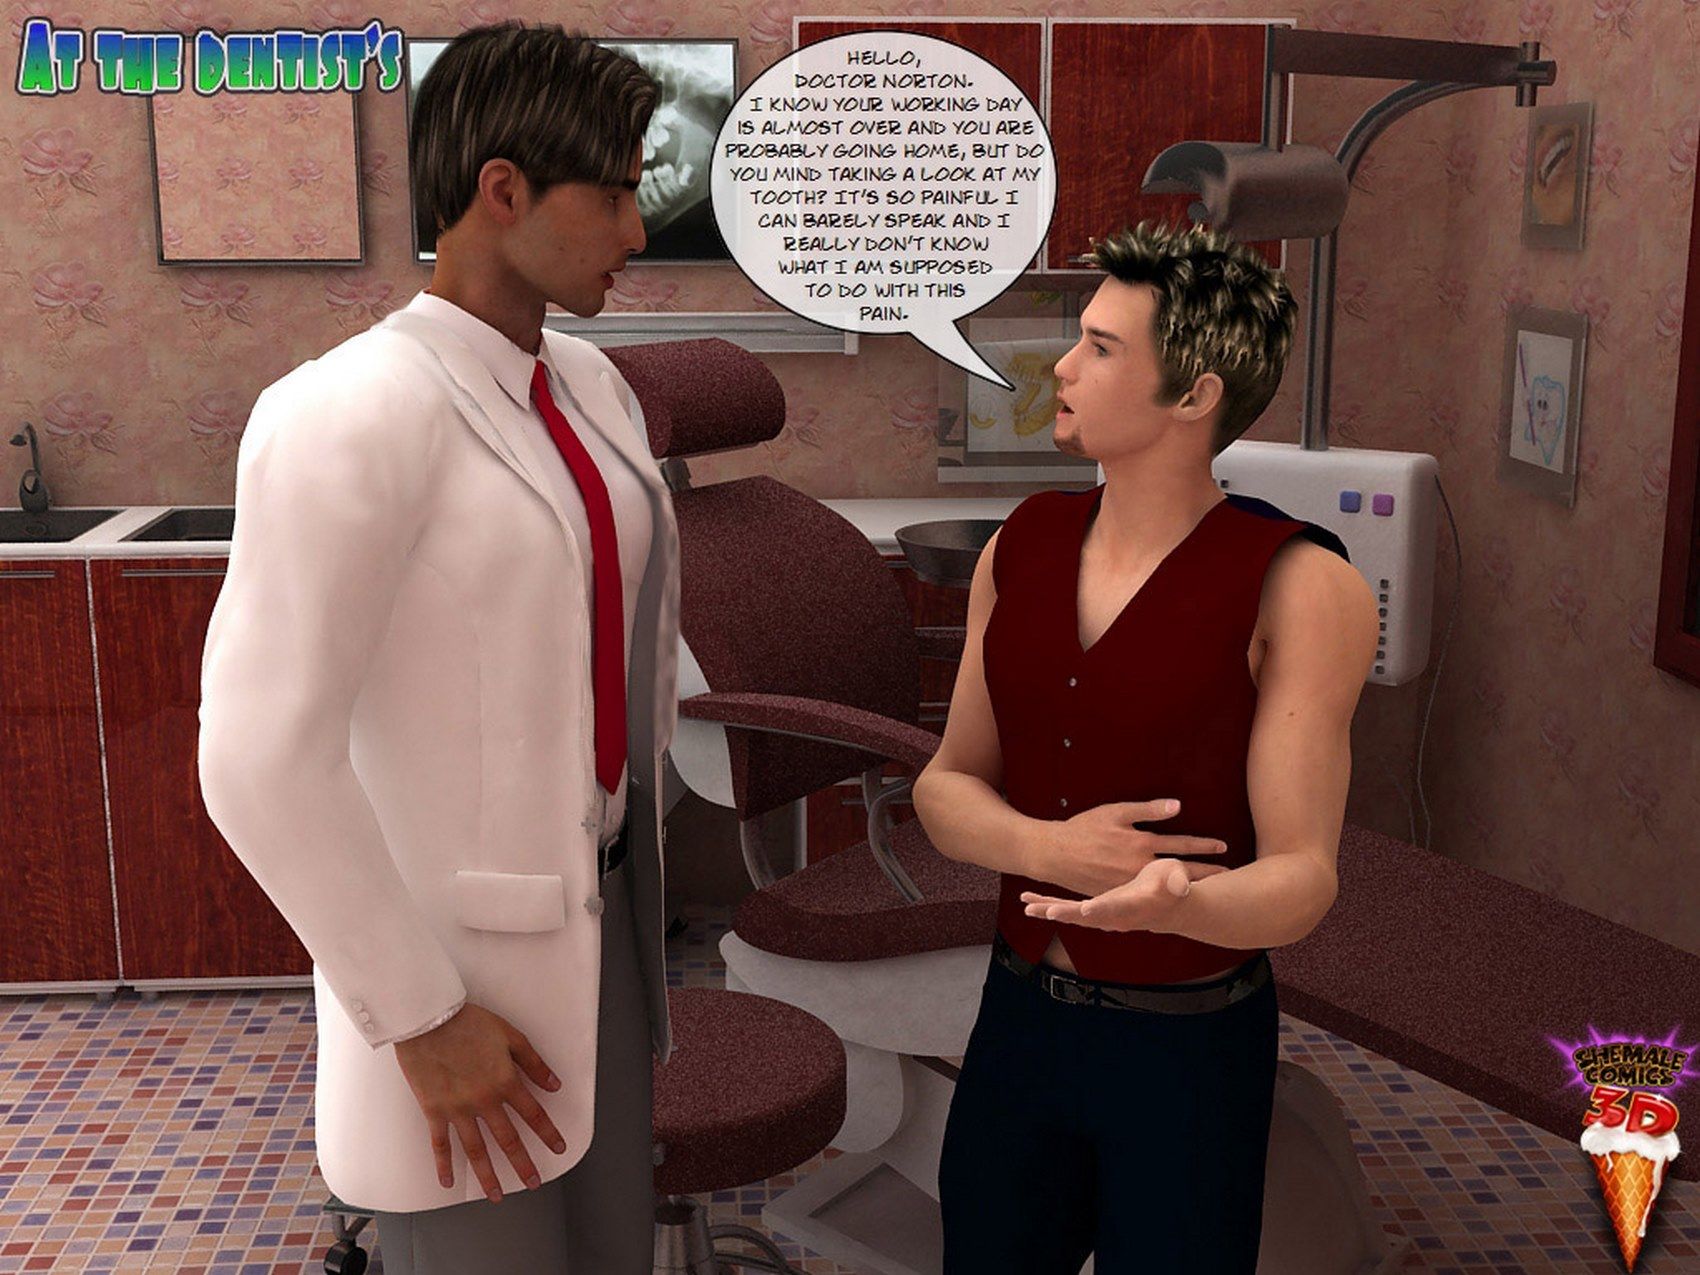 Shemale3dcomics - At The Dentists page 1